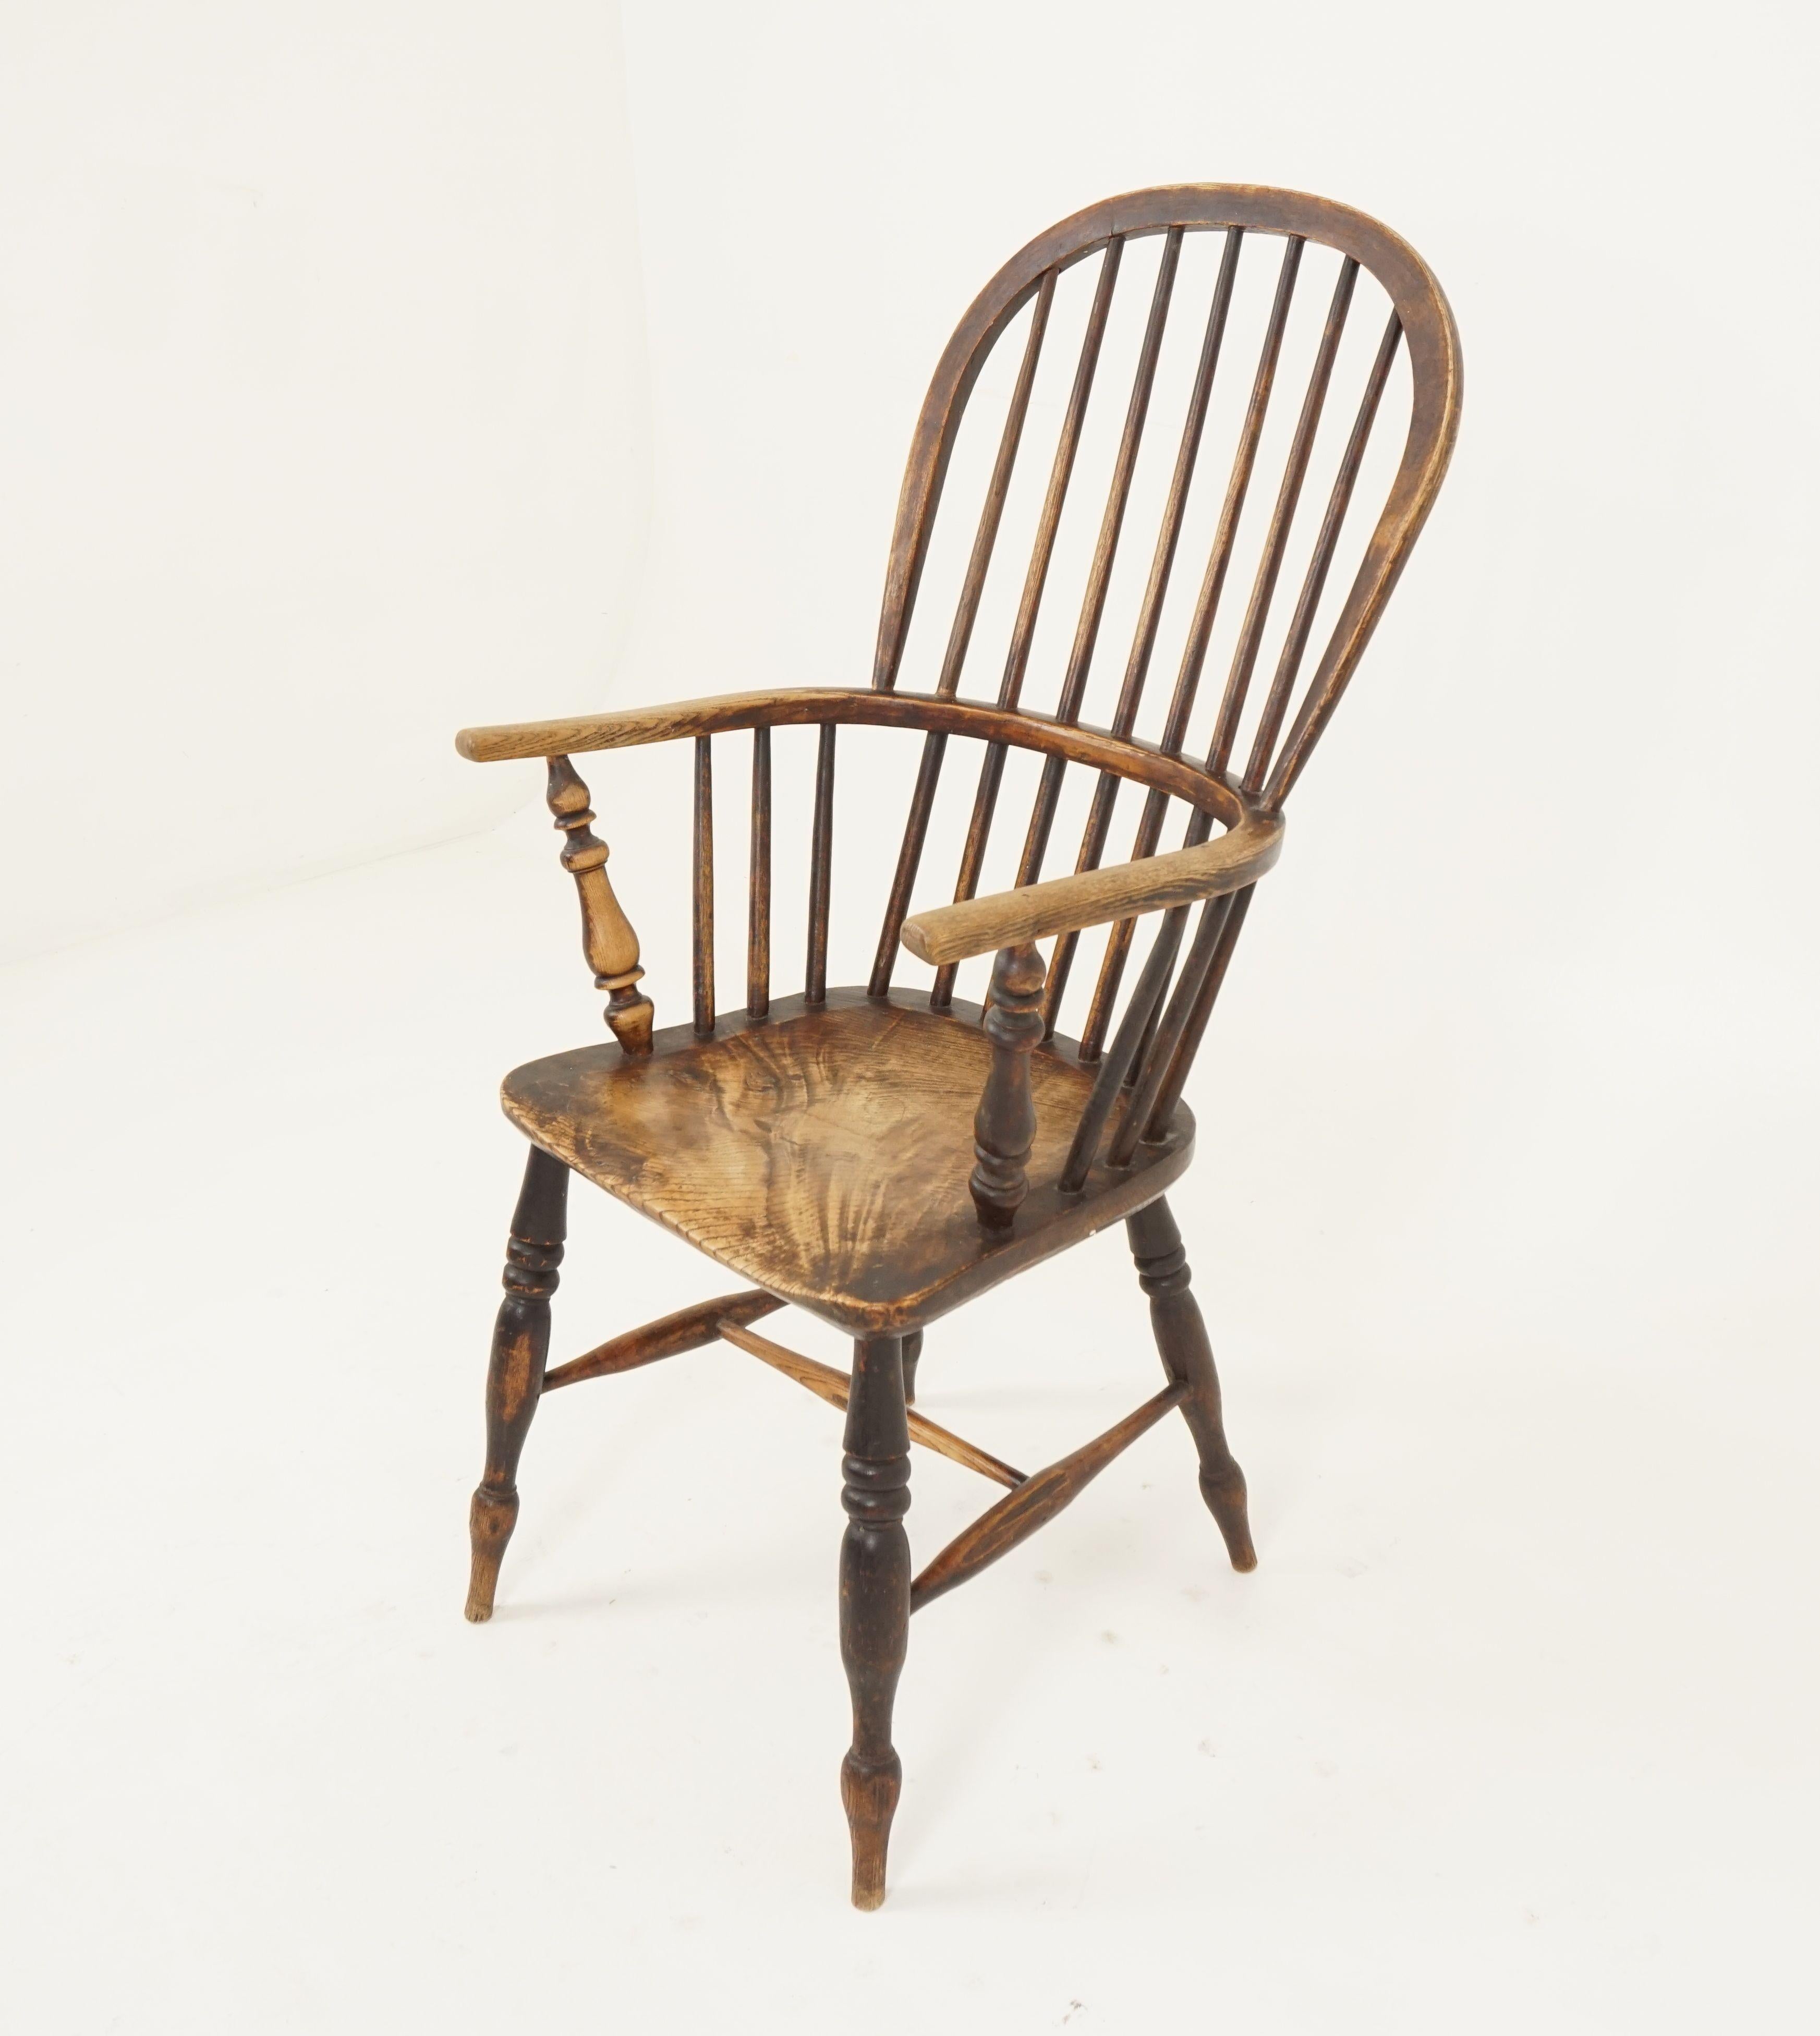 Antique Victorian chair, ash + elm, windsor arm chair, Scotland 1840, BX6

Scotland 1840
Solid ash + elm
Original finish
There is a hooped ash top rail with stich back
There are also hooped arms with turned arm supports
The seat is made of